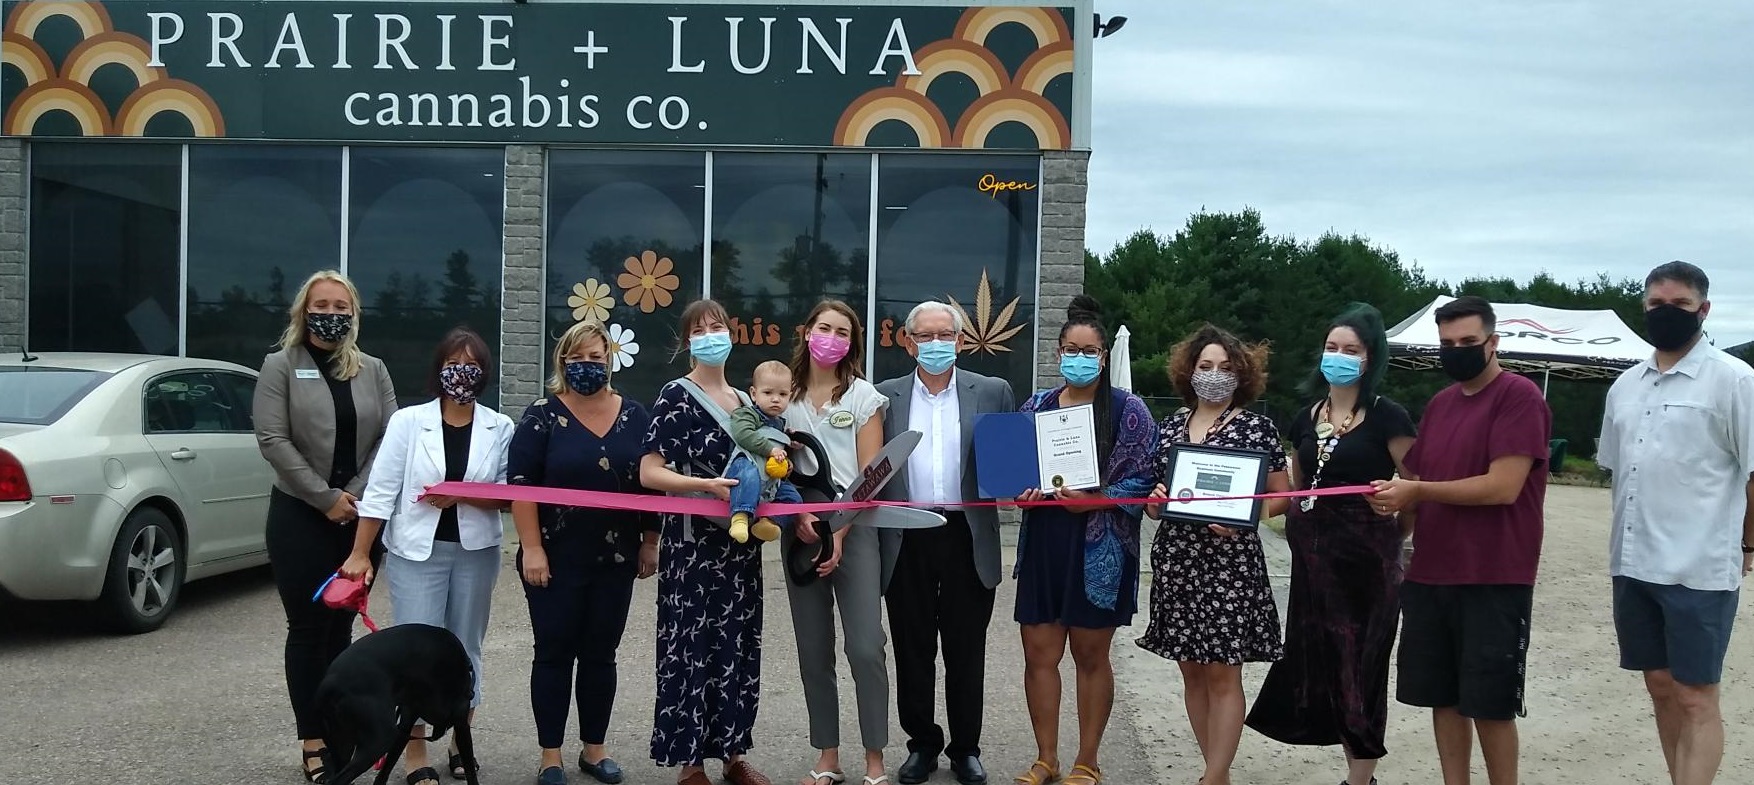 a group image of the Prairie and Luna Grand Opening event